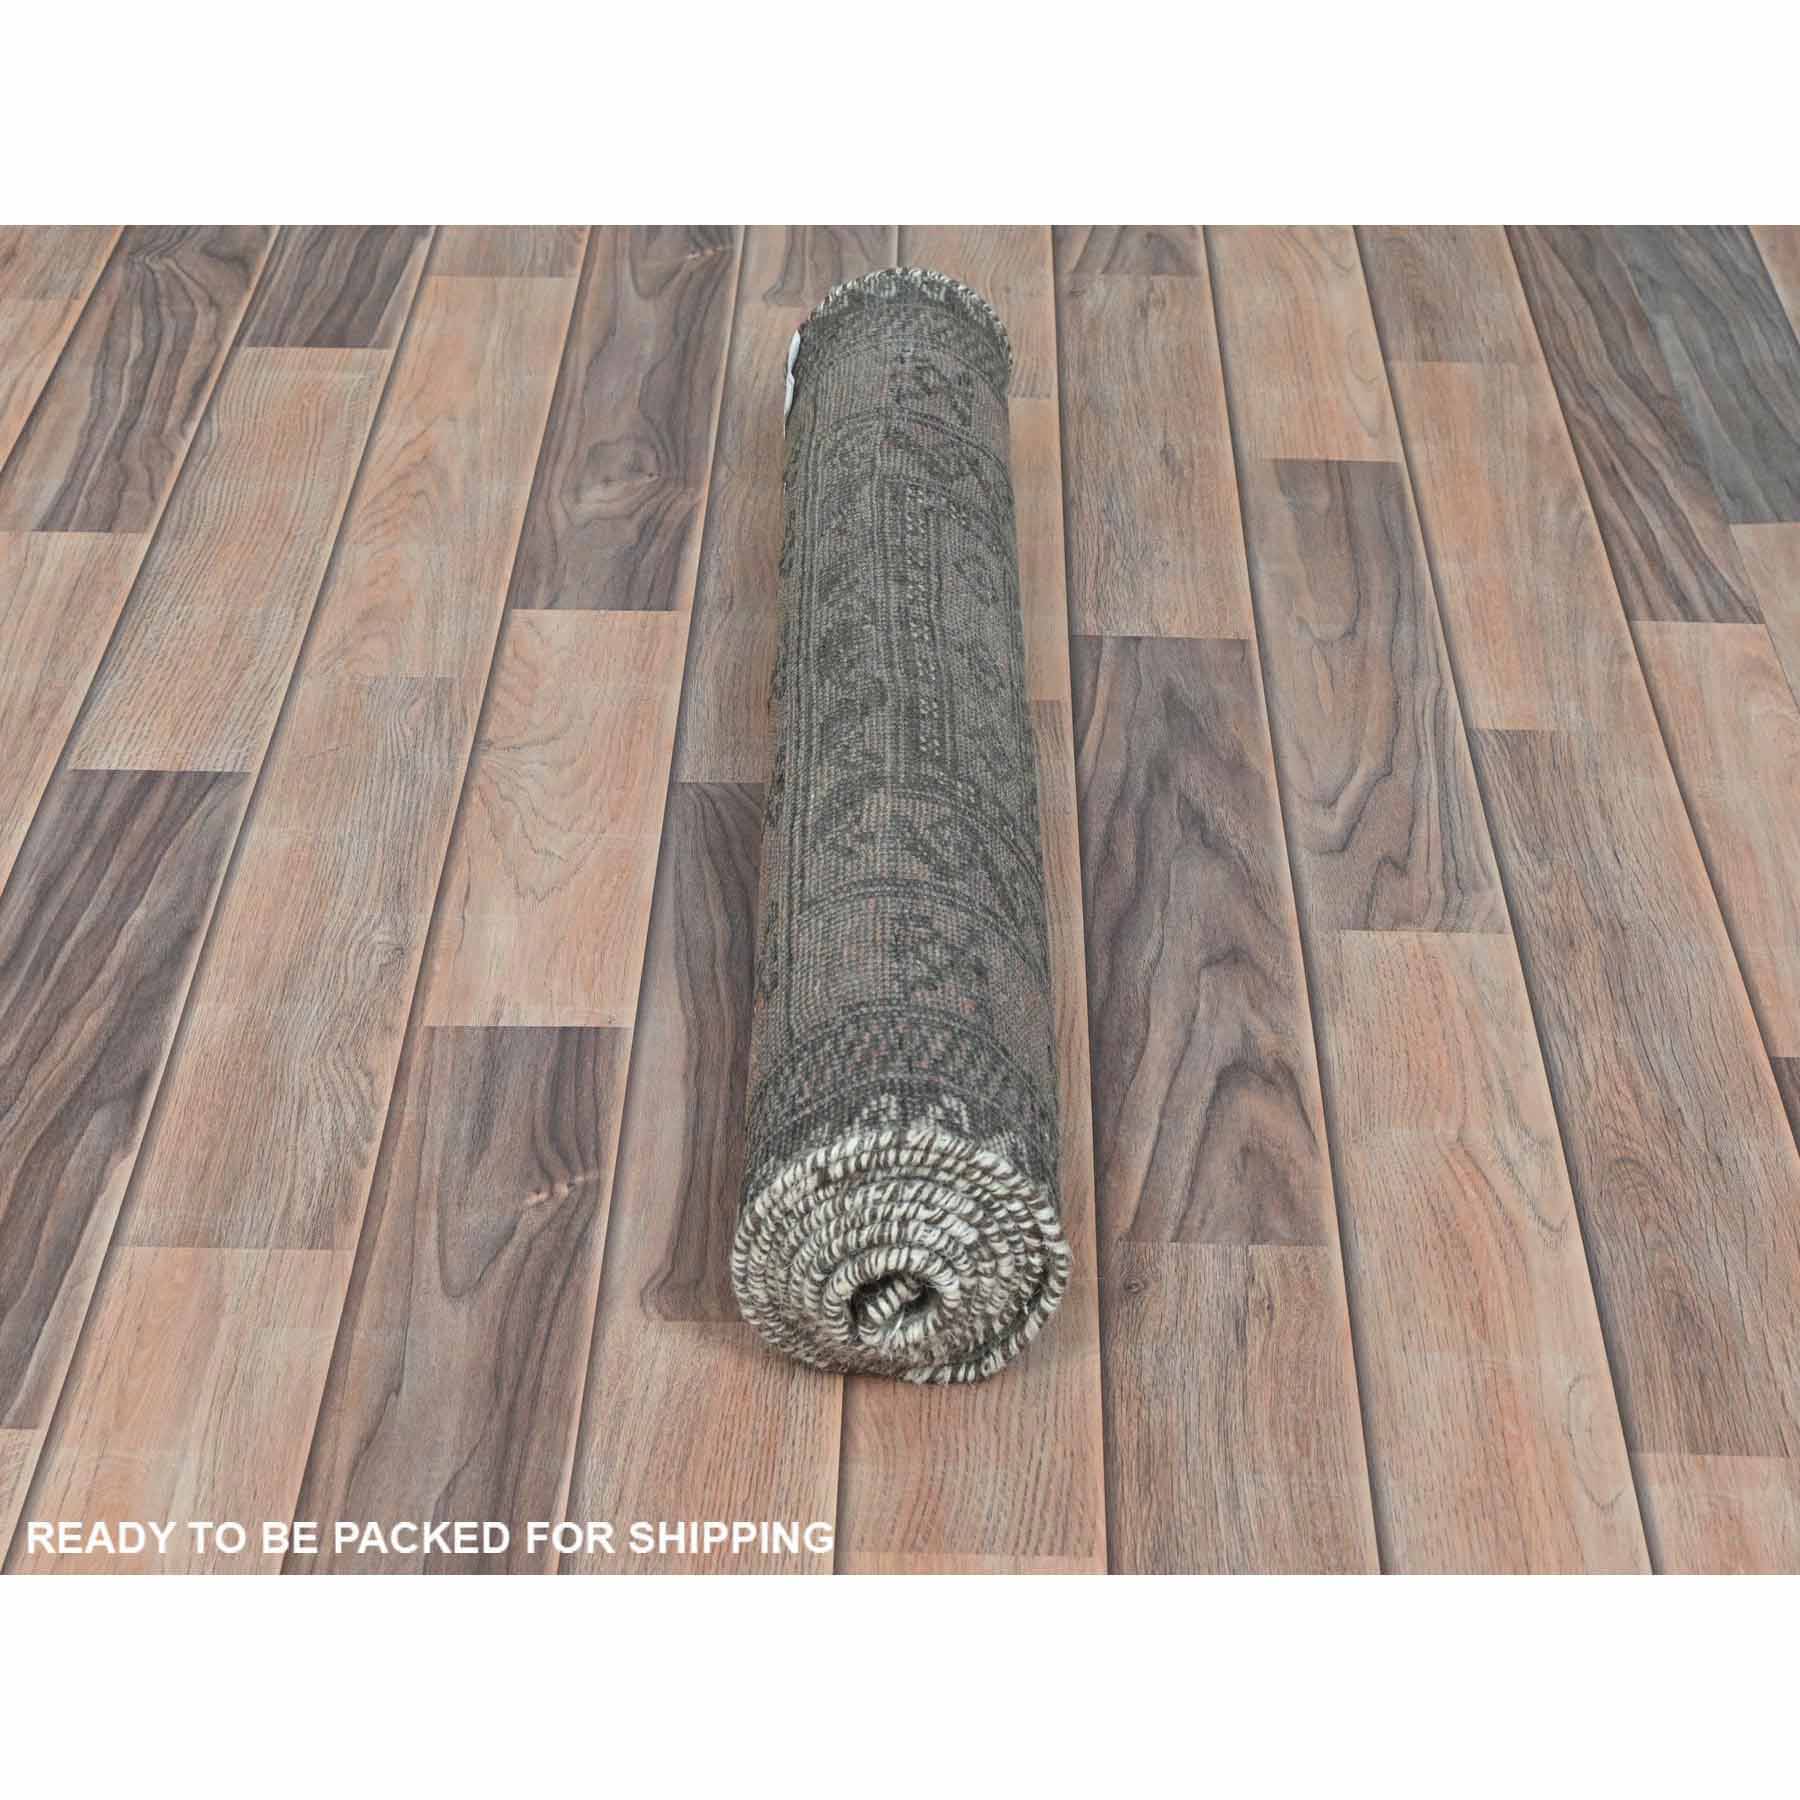 Overdyed-Vintage-Hand-Knotted-Rug-409570